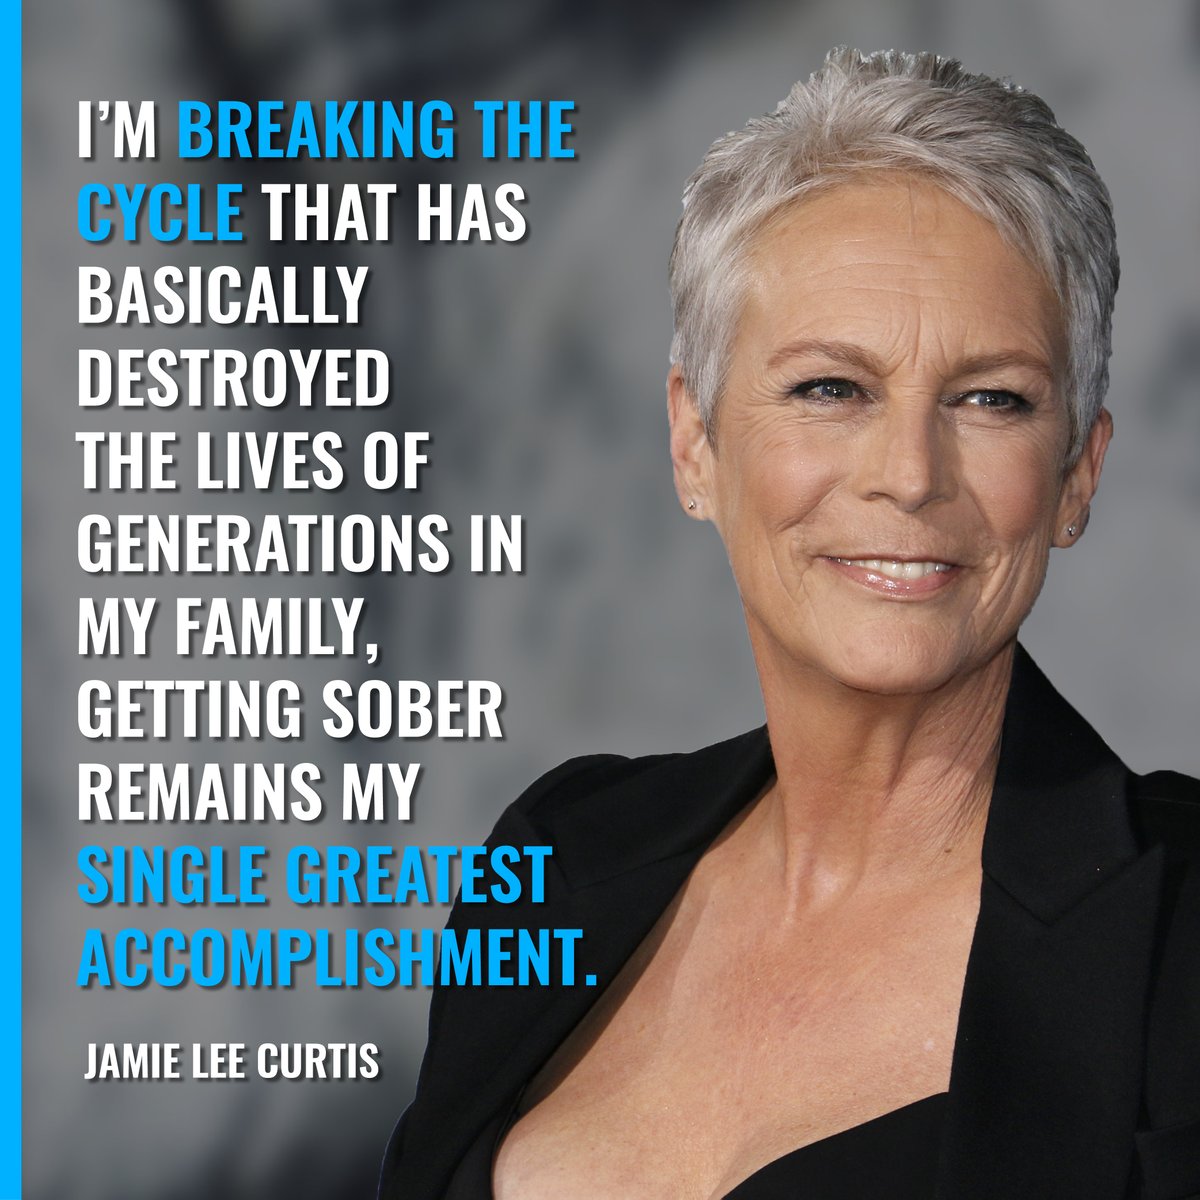 “I’m breaking the cycle that has basically destroyed the lives of generations in my family...Getting sober remains my single greatest accomplishment…” - Jamie Lee Curtis  #RecoveryUnplugged #WomenInRecovery #WomensHistoryMonth